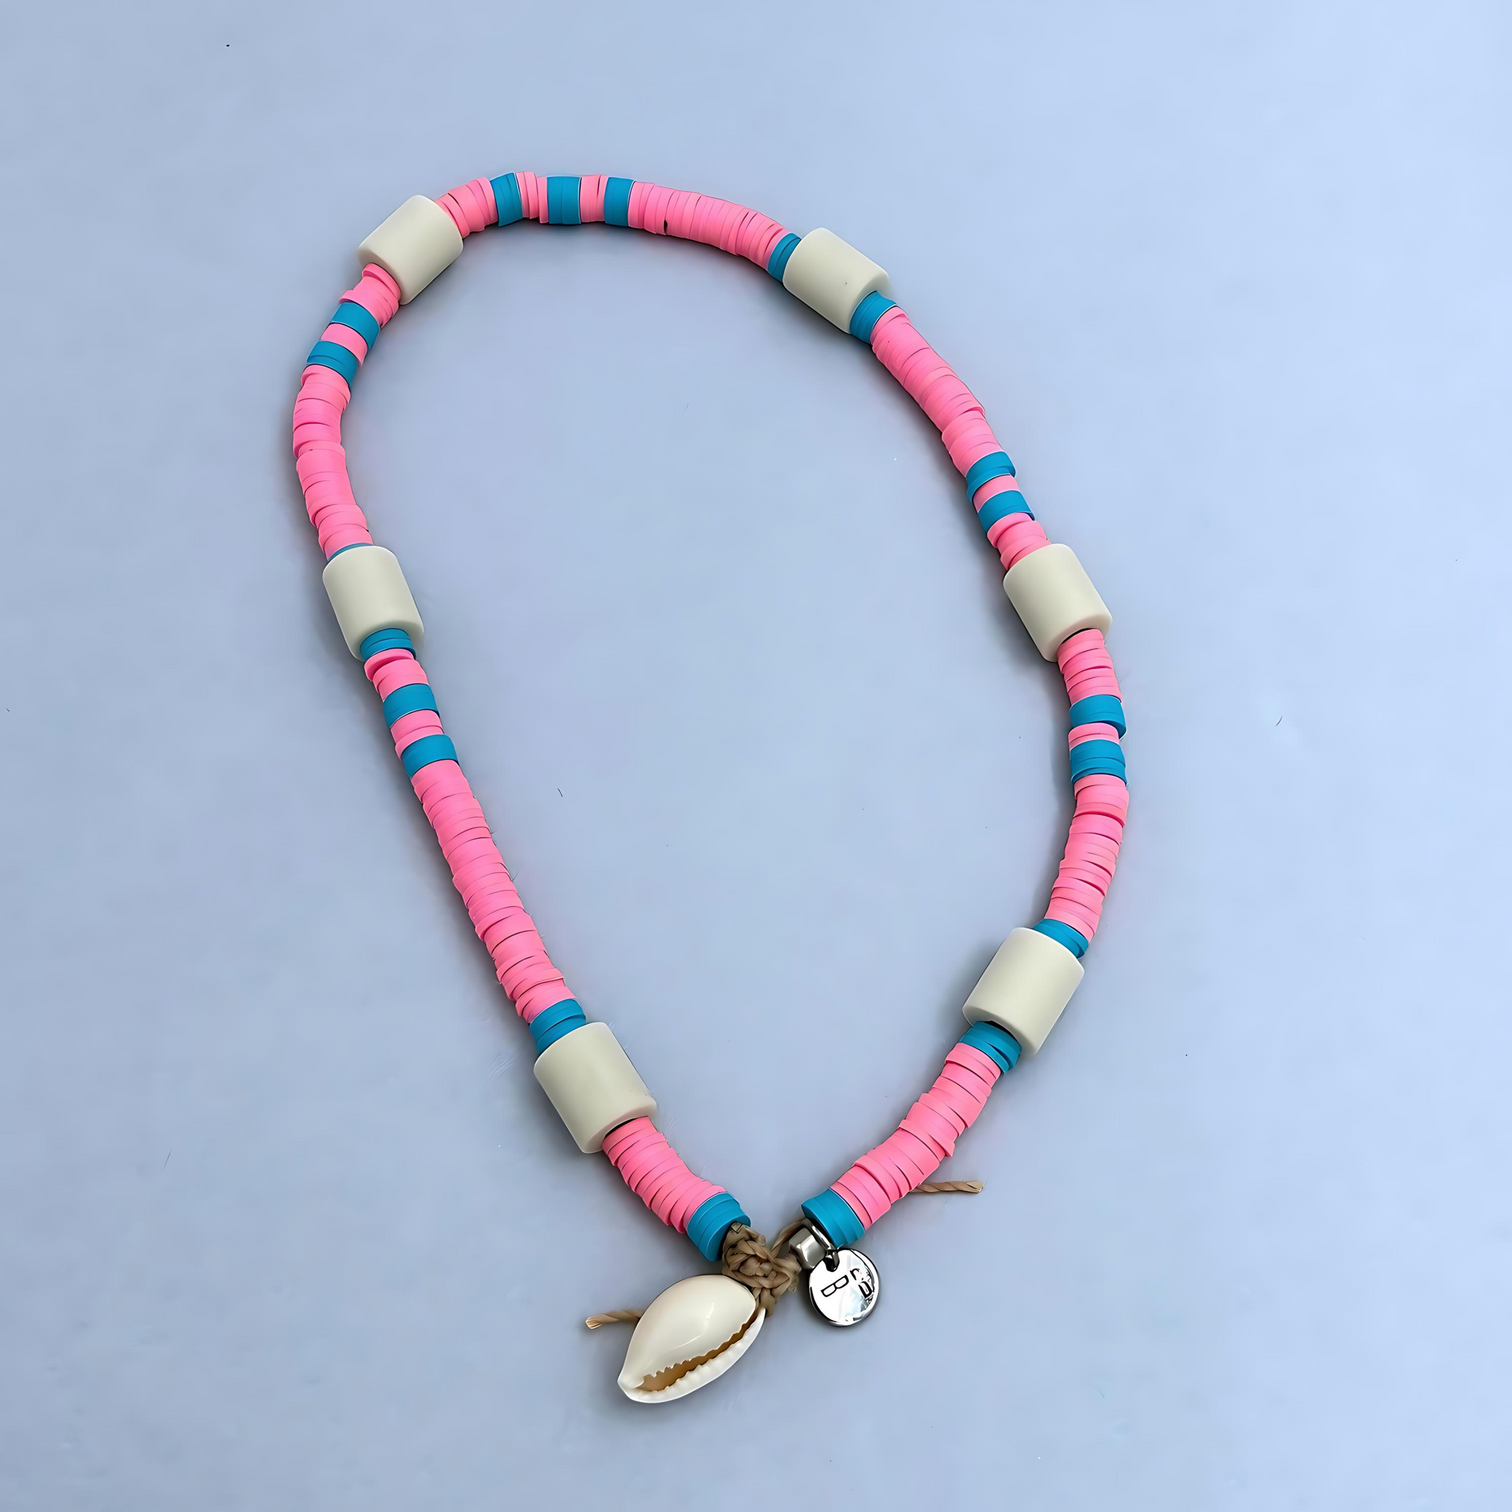 The cool surfer's look anti-tick dog necklace in a bubblegum pink colour.